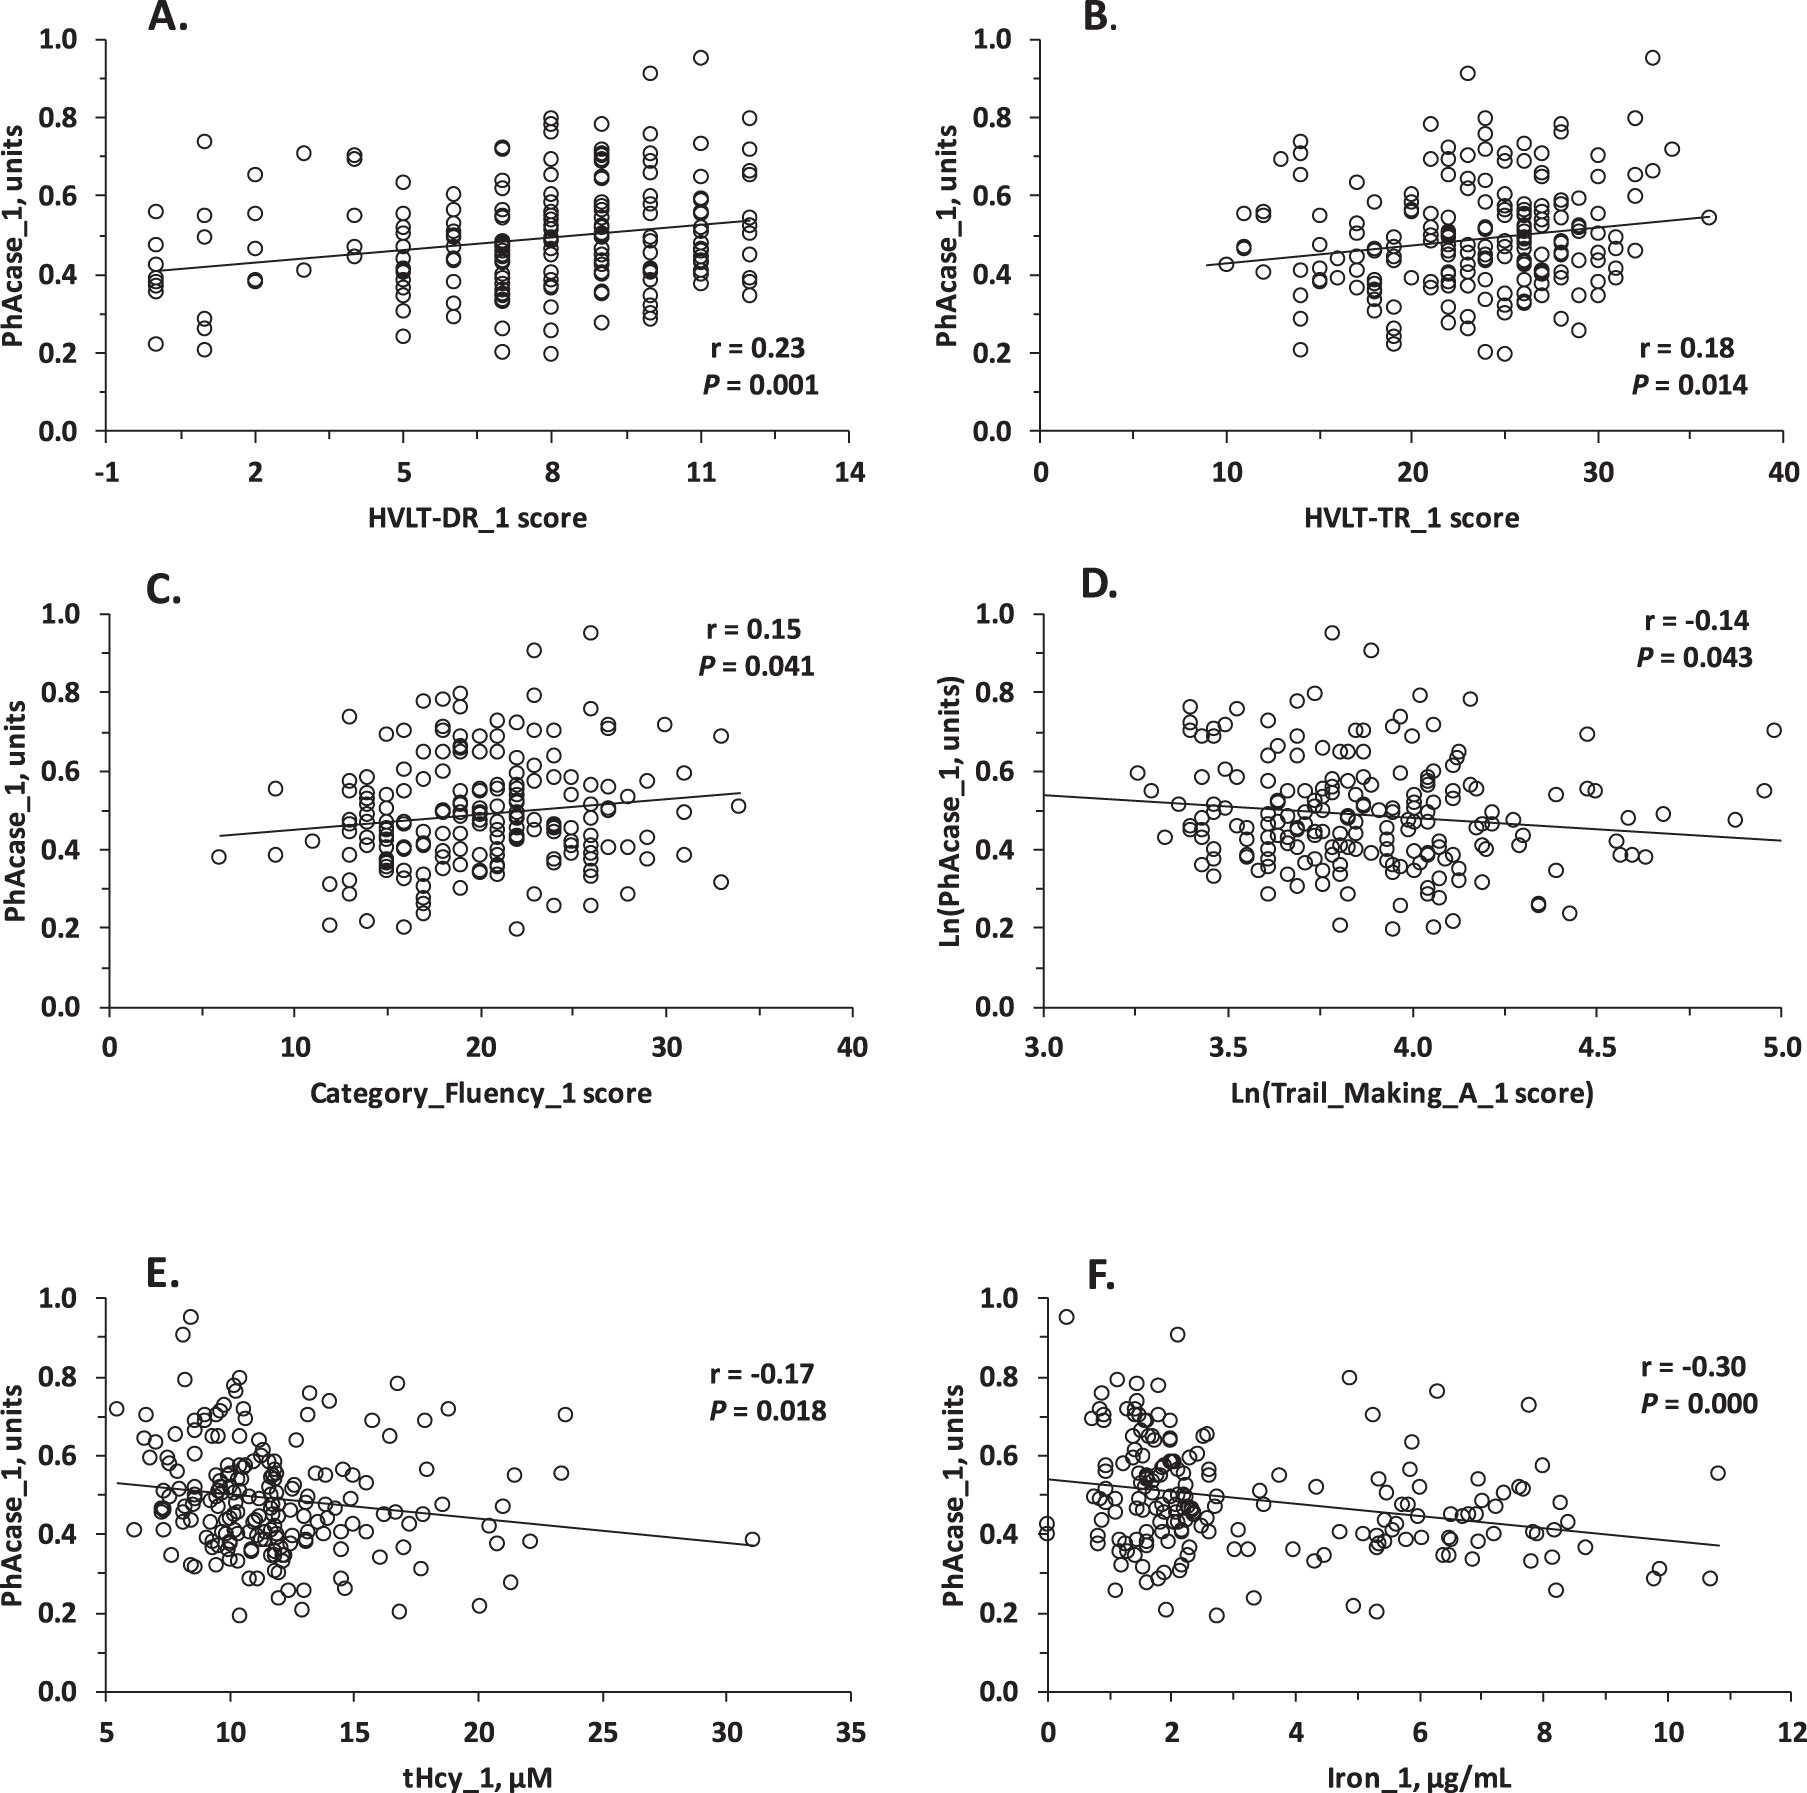 Relationships between PhAcase activity of serum PON1 and verbal episodic memory (A) HVLT-DR, (B) HVLT-TR test scores, tHcy (C), and iron (D) at baseline.